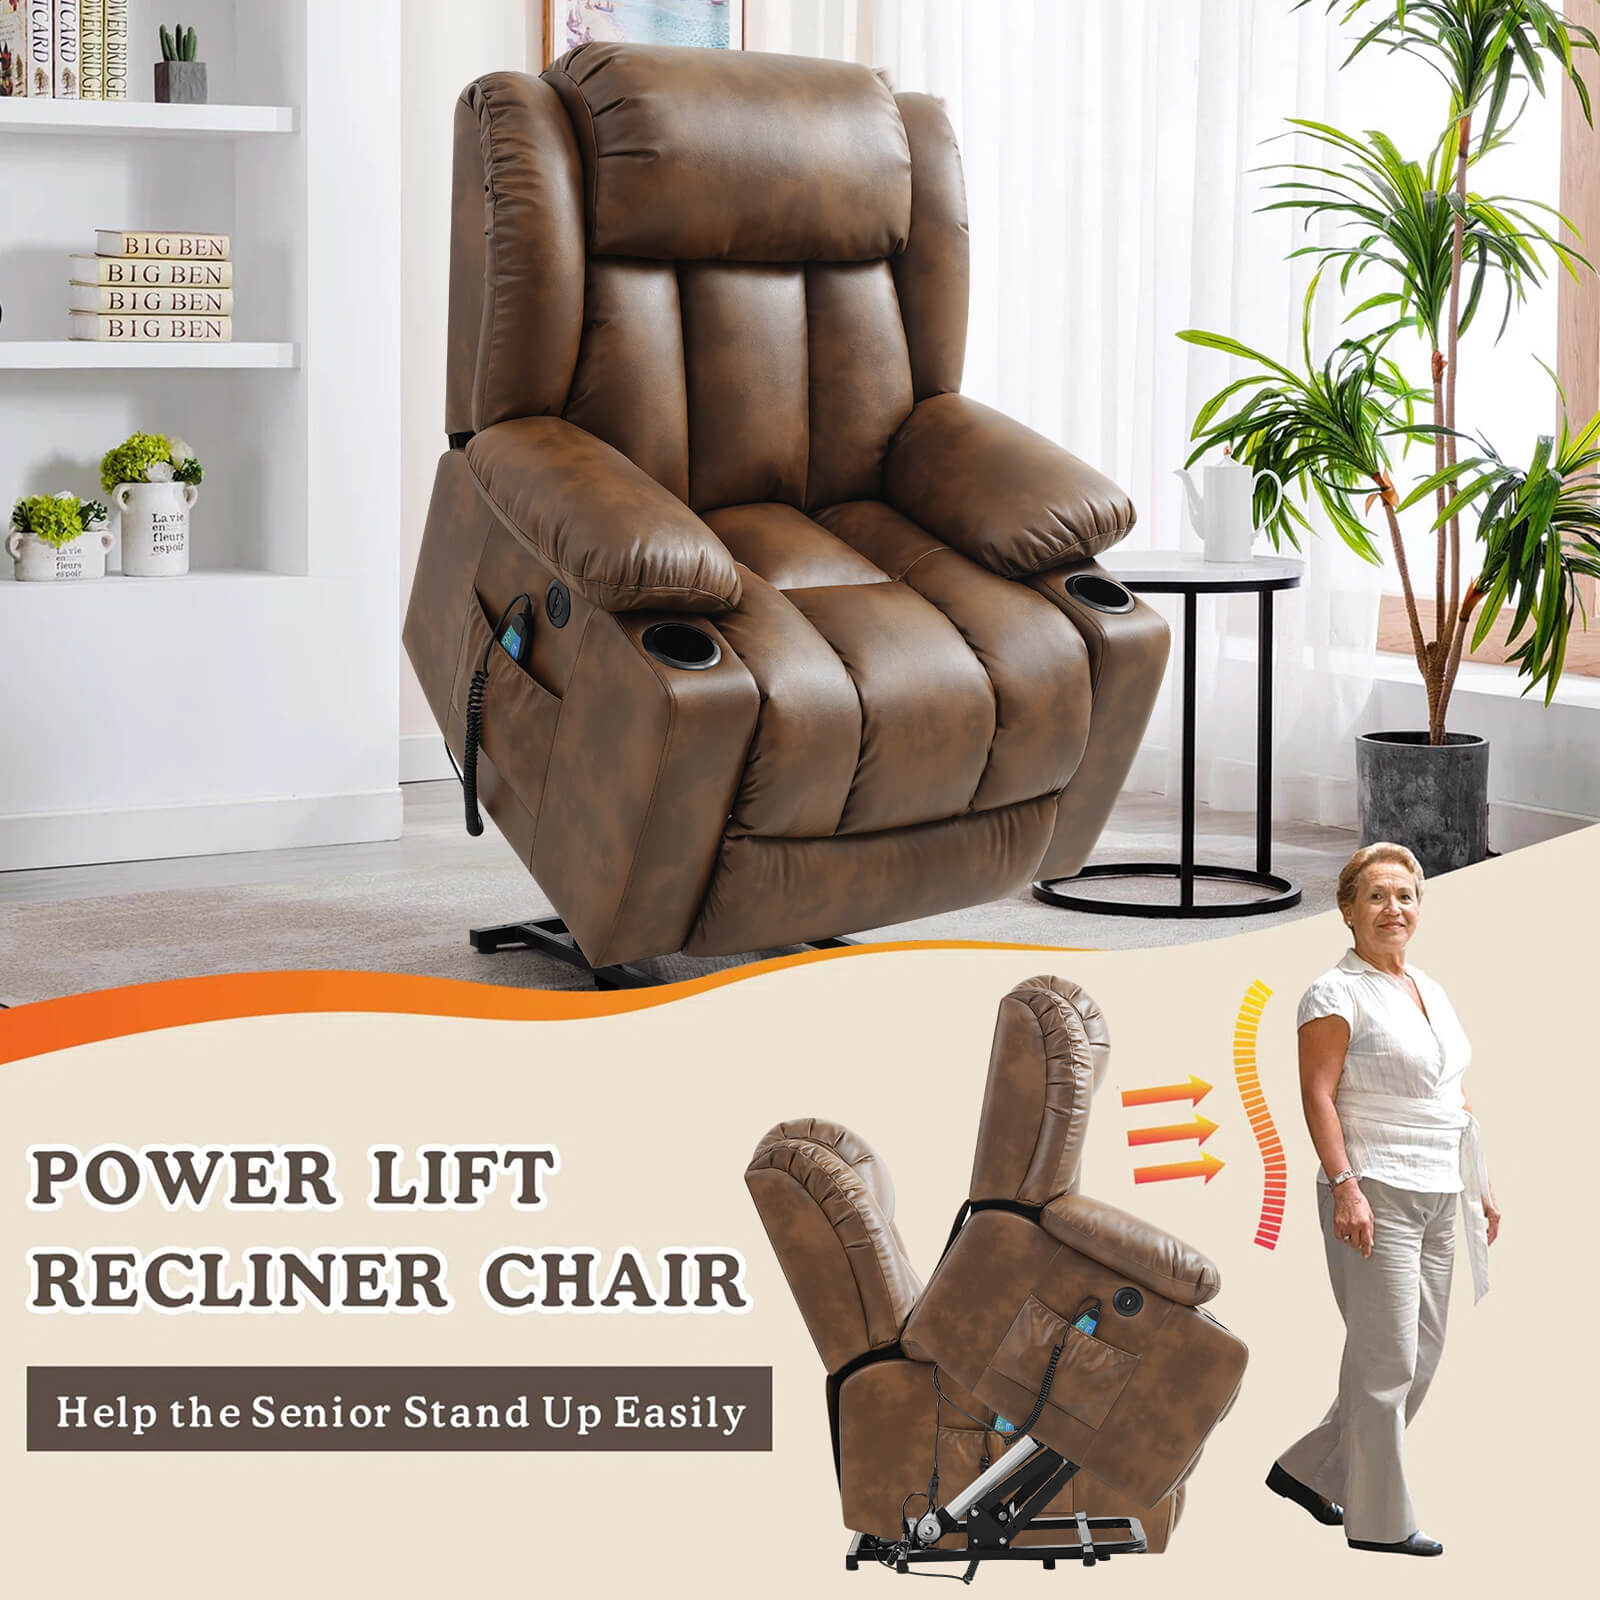 Luxury Lift Chair Recliner with Heat and Massage, Breathable Leather light brown